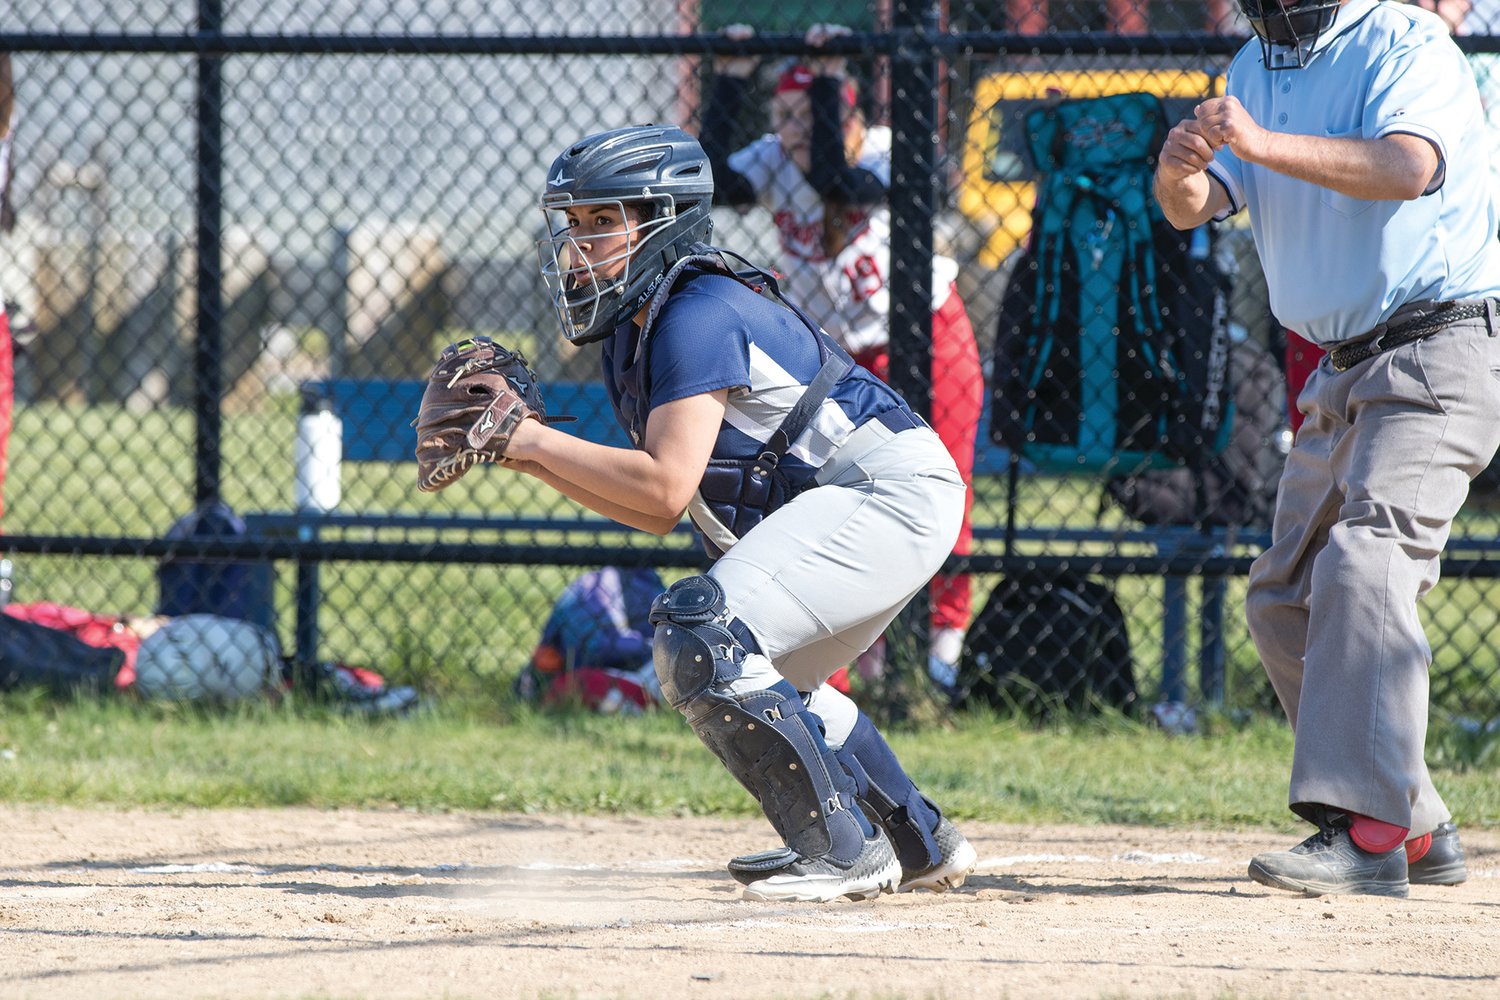 Jaydin Buckley looks up to throw runner out against Barnstable